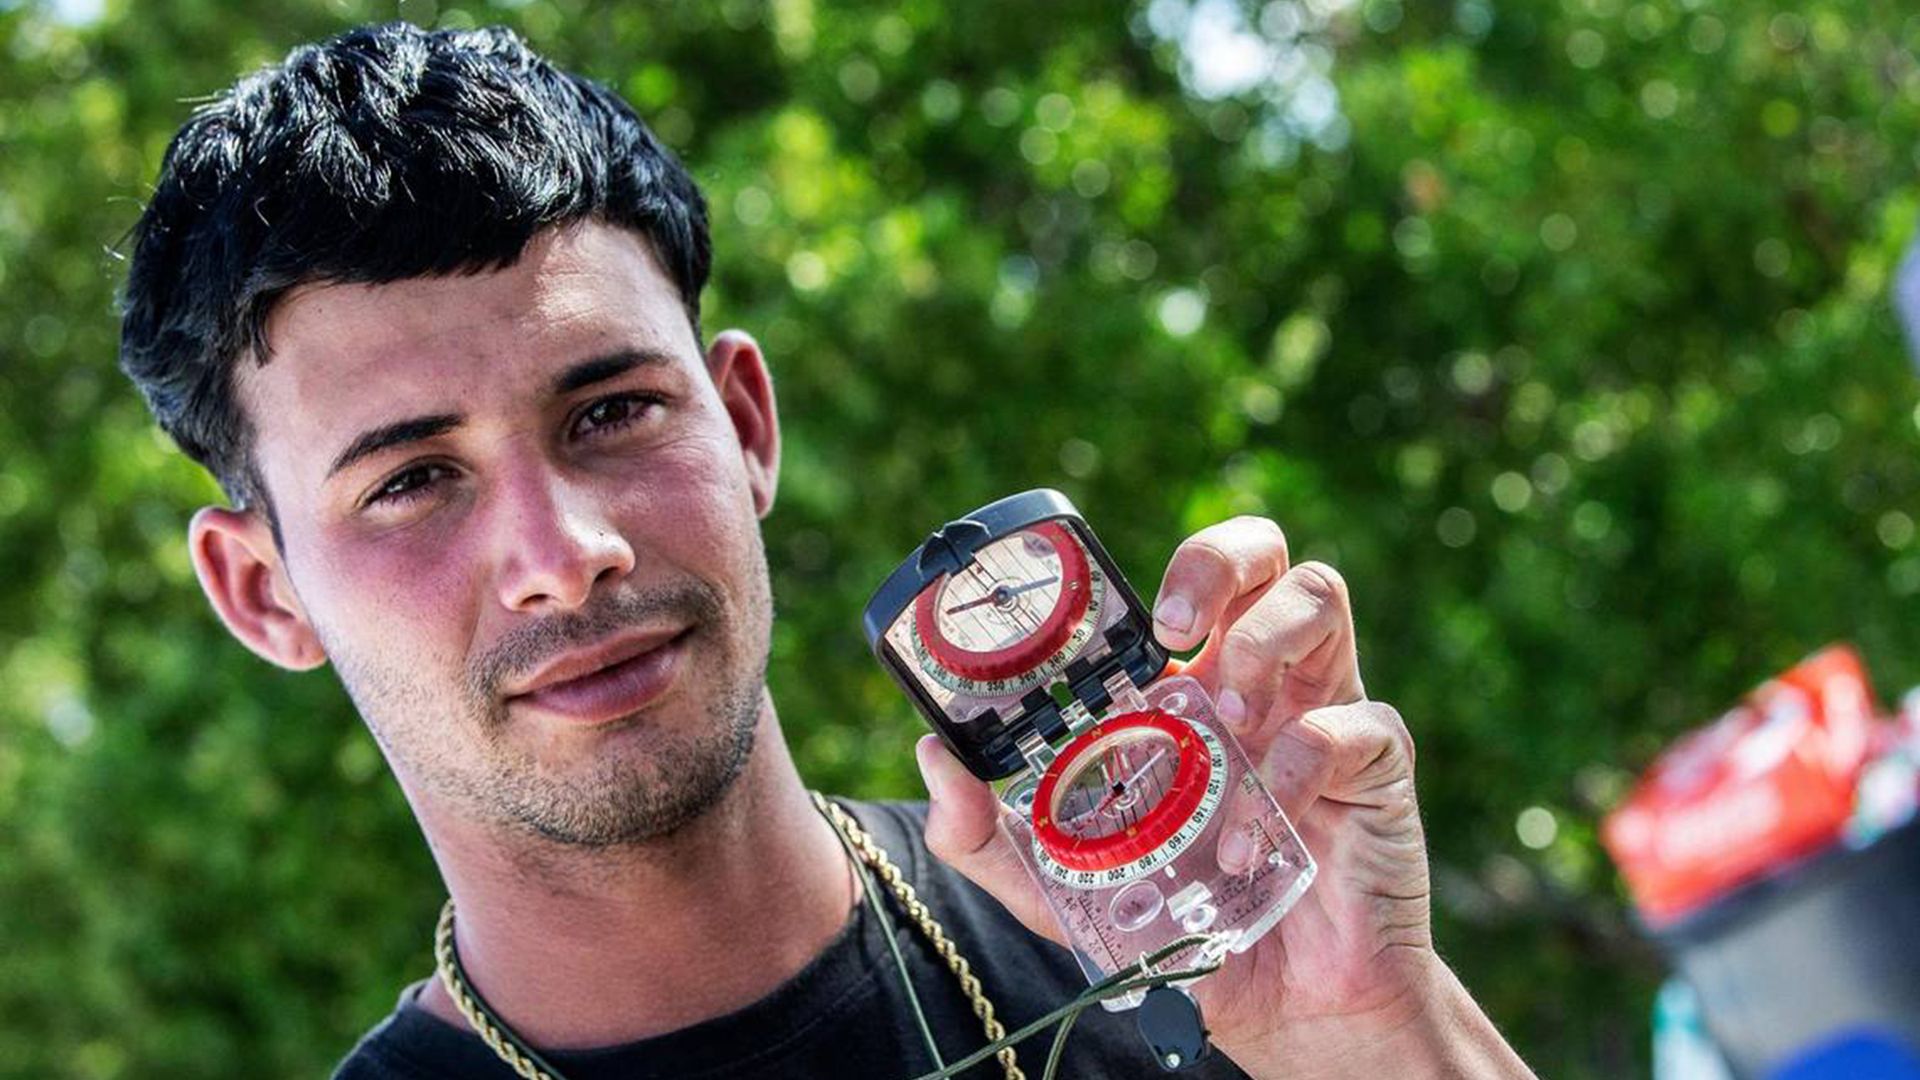 Cuban migrant Jorge Yunier Cepa Sanchez displays the compass he used to lead one of two groups of Cuban migrants to the Florida Keys